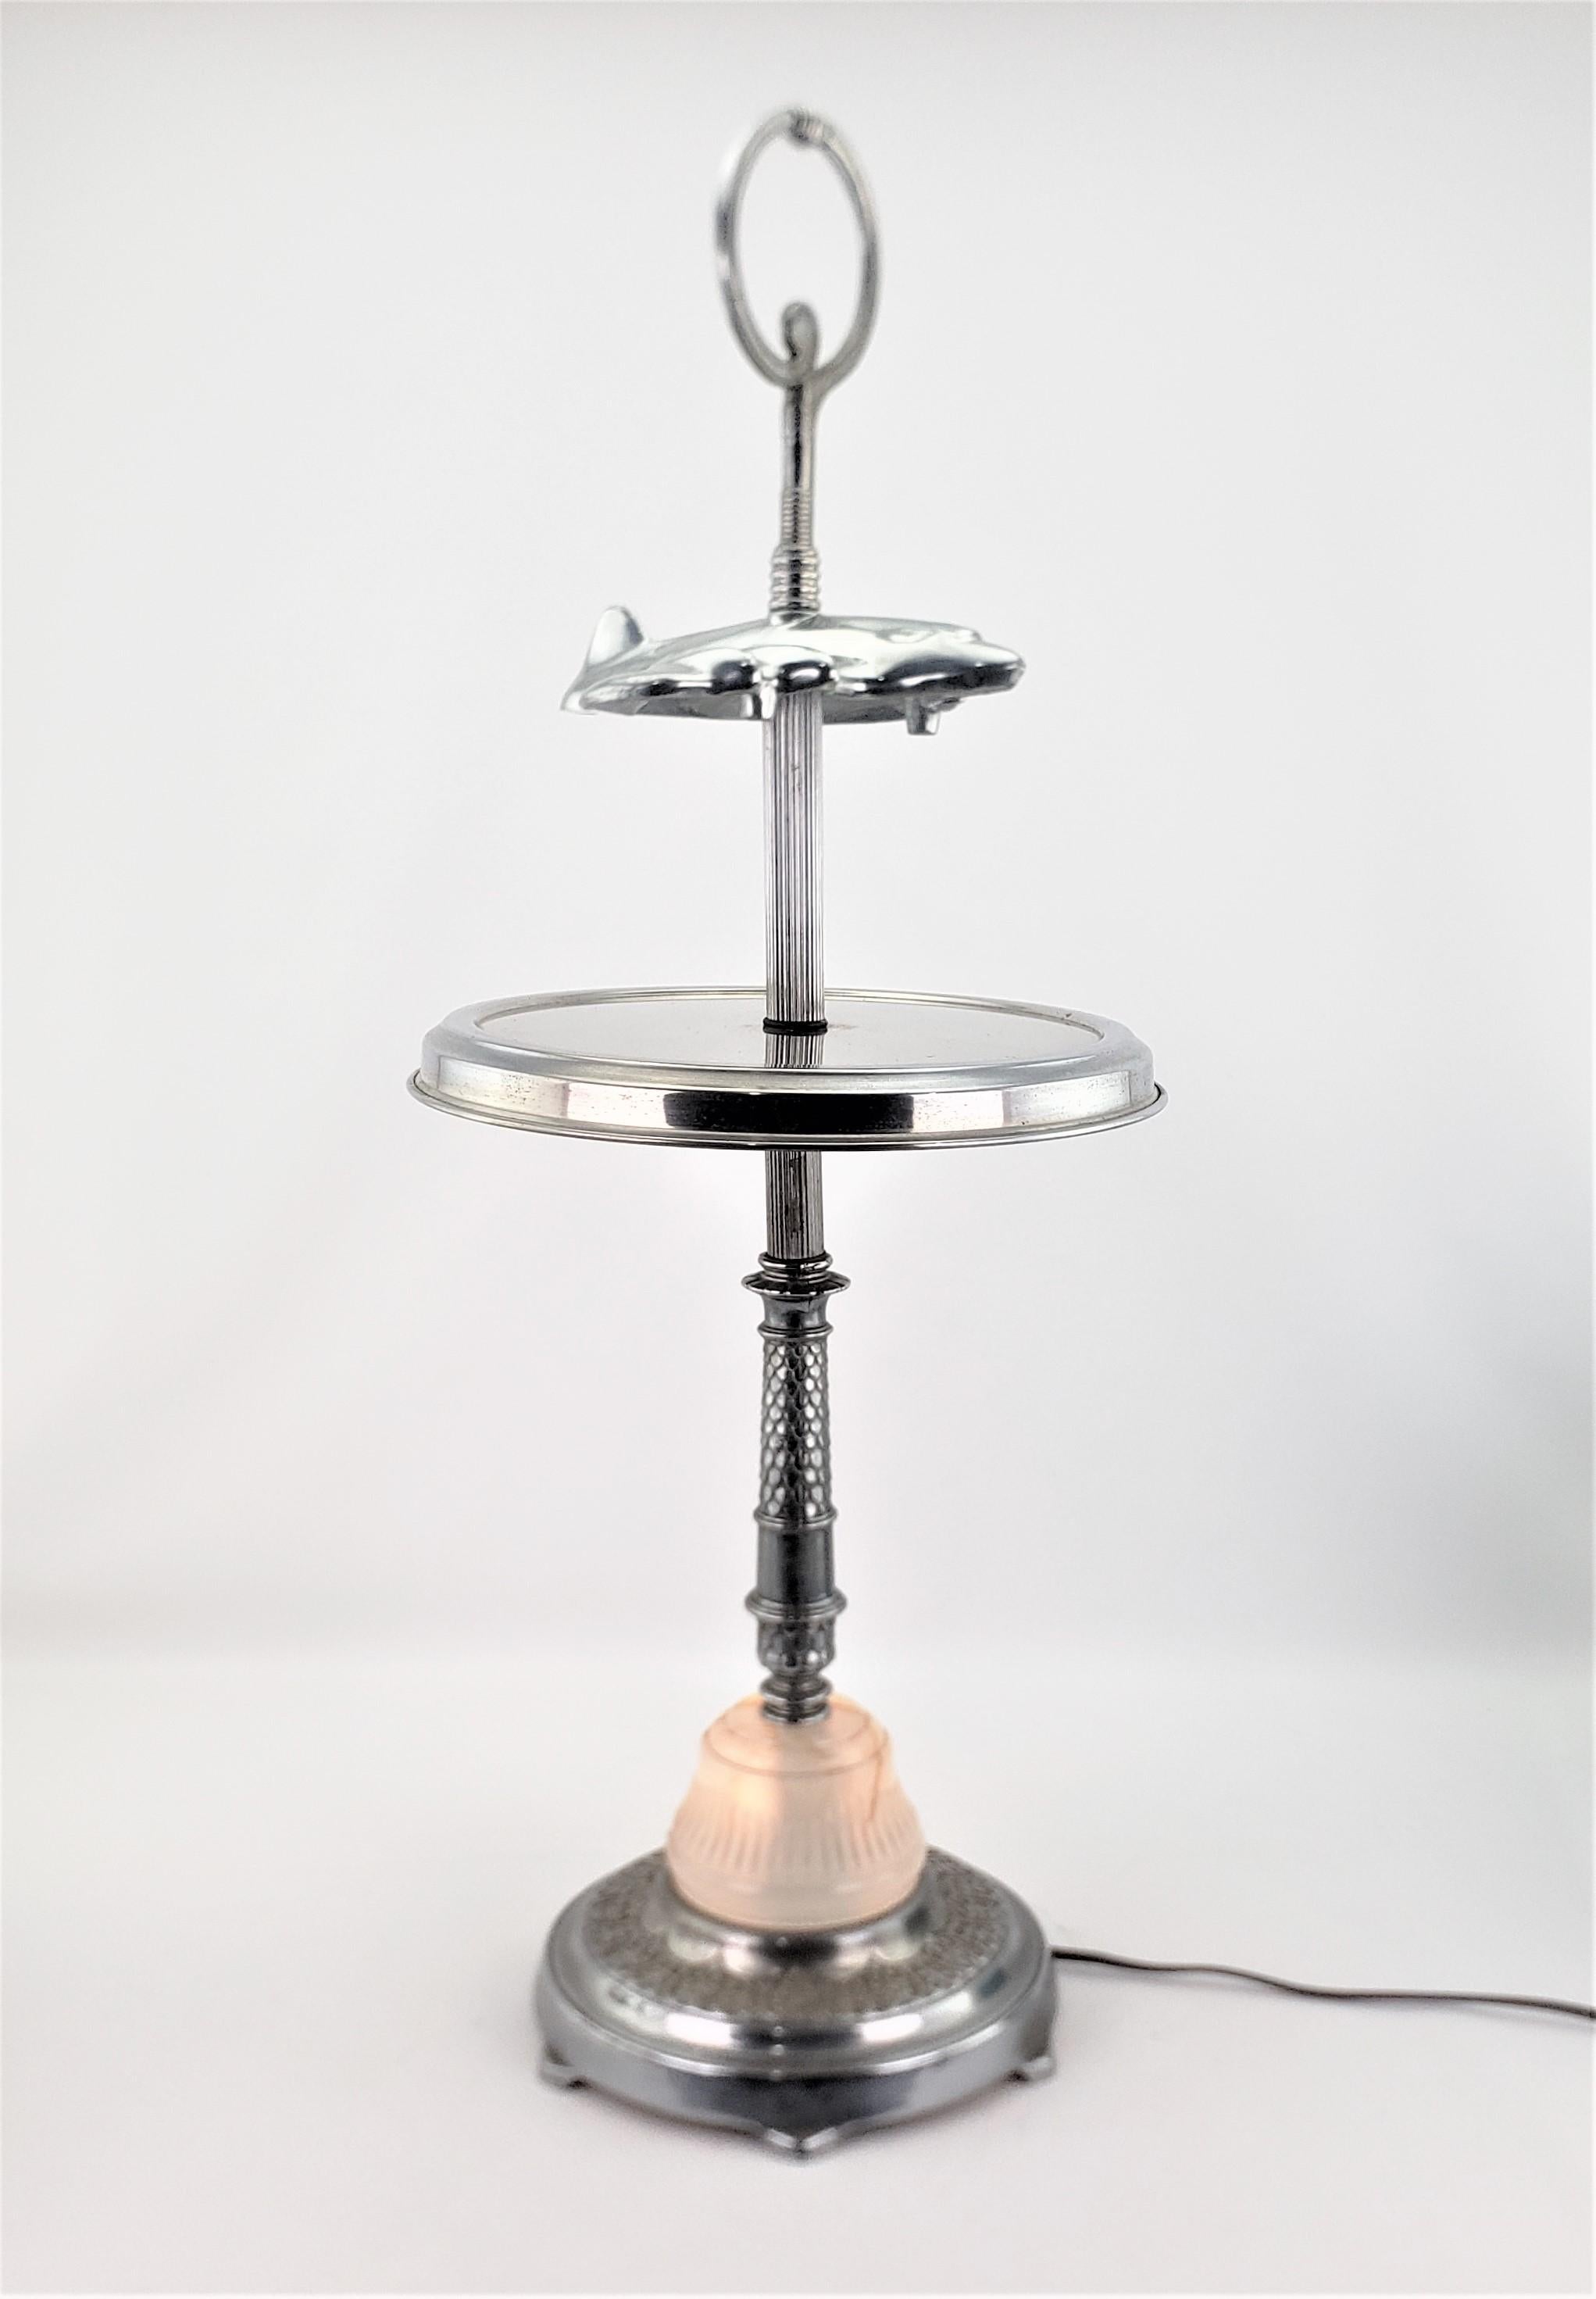 Metal Unique Art Deco Styled Chrome Jet Airplane Lighted Smoker's Stand or Table For Sale